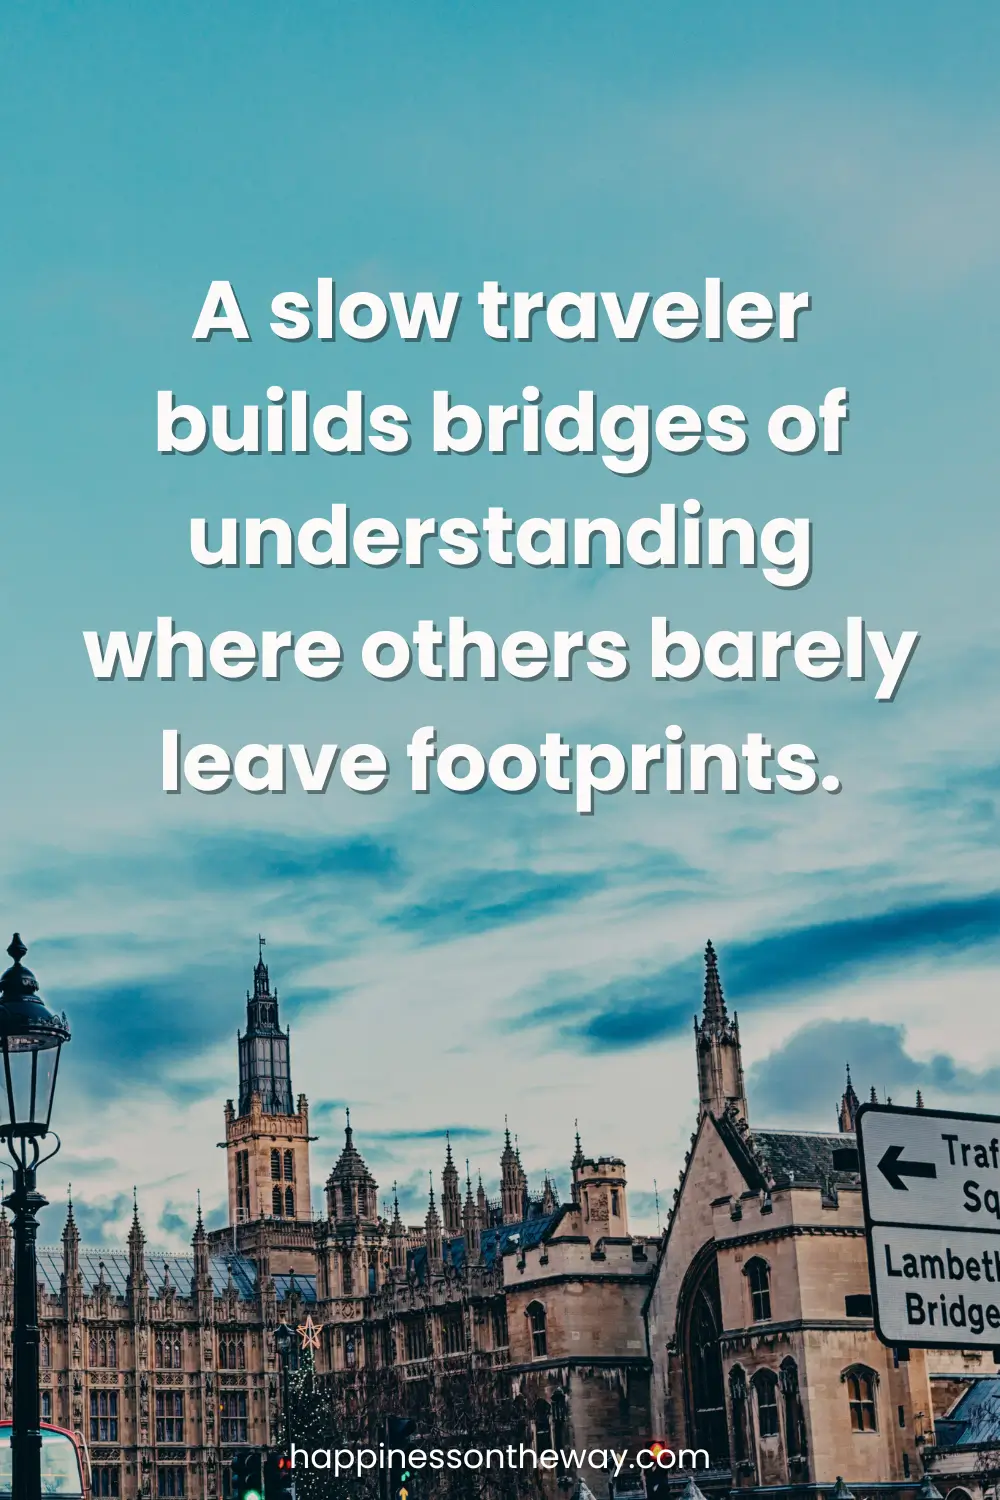 Buildings in London on a blue sky with a low travel quote: A slow traveler builds bridges of understanding where others barely leave footprints.